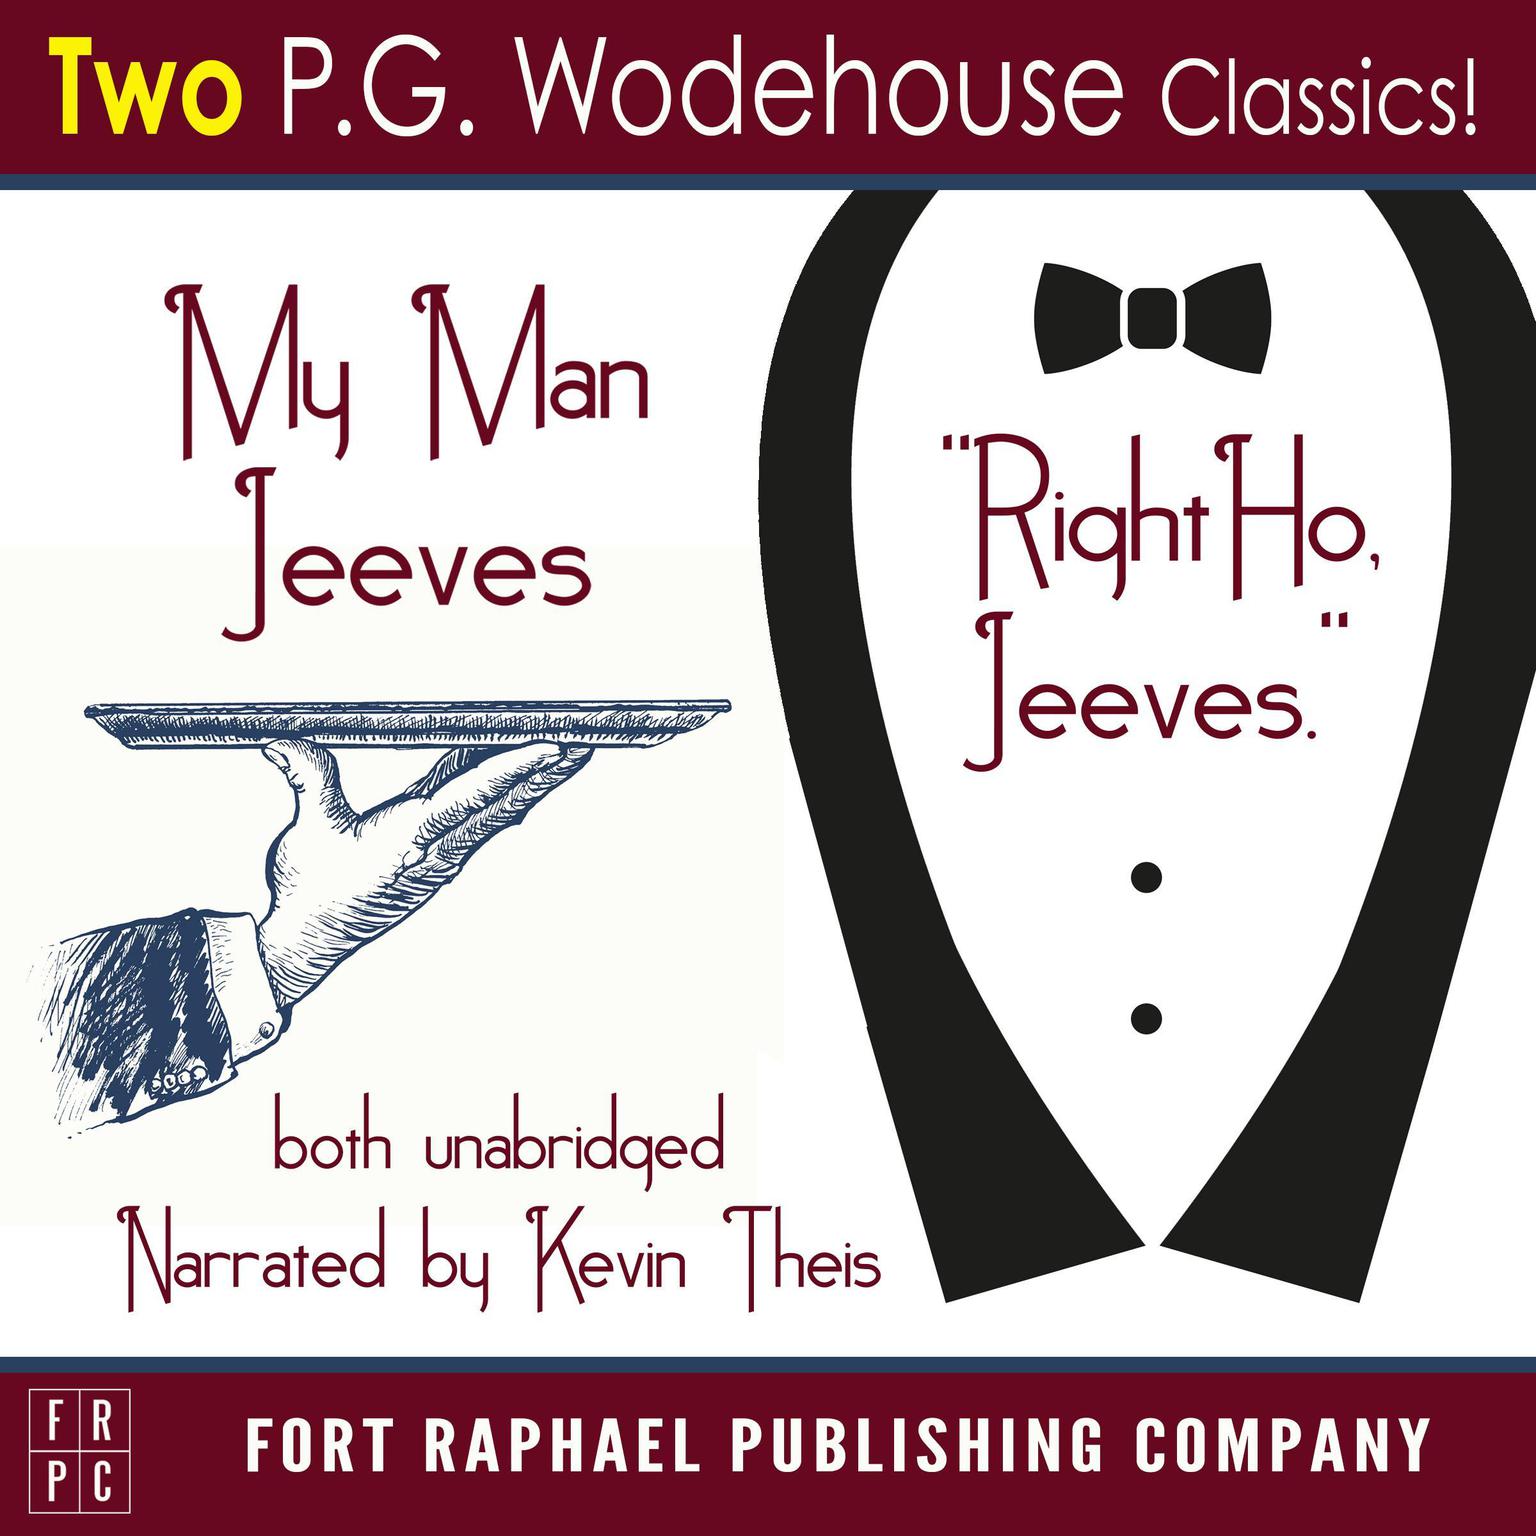 My Man Jeeves and Right Ho, Jeeves - Unabridged Audiobook, by P. G. Wodehouse